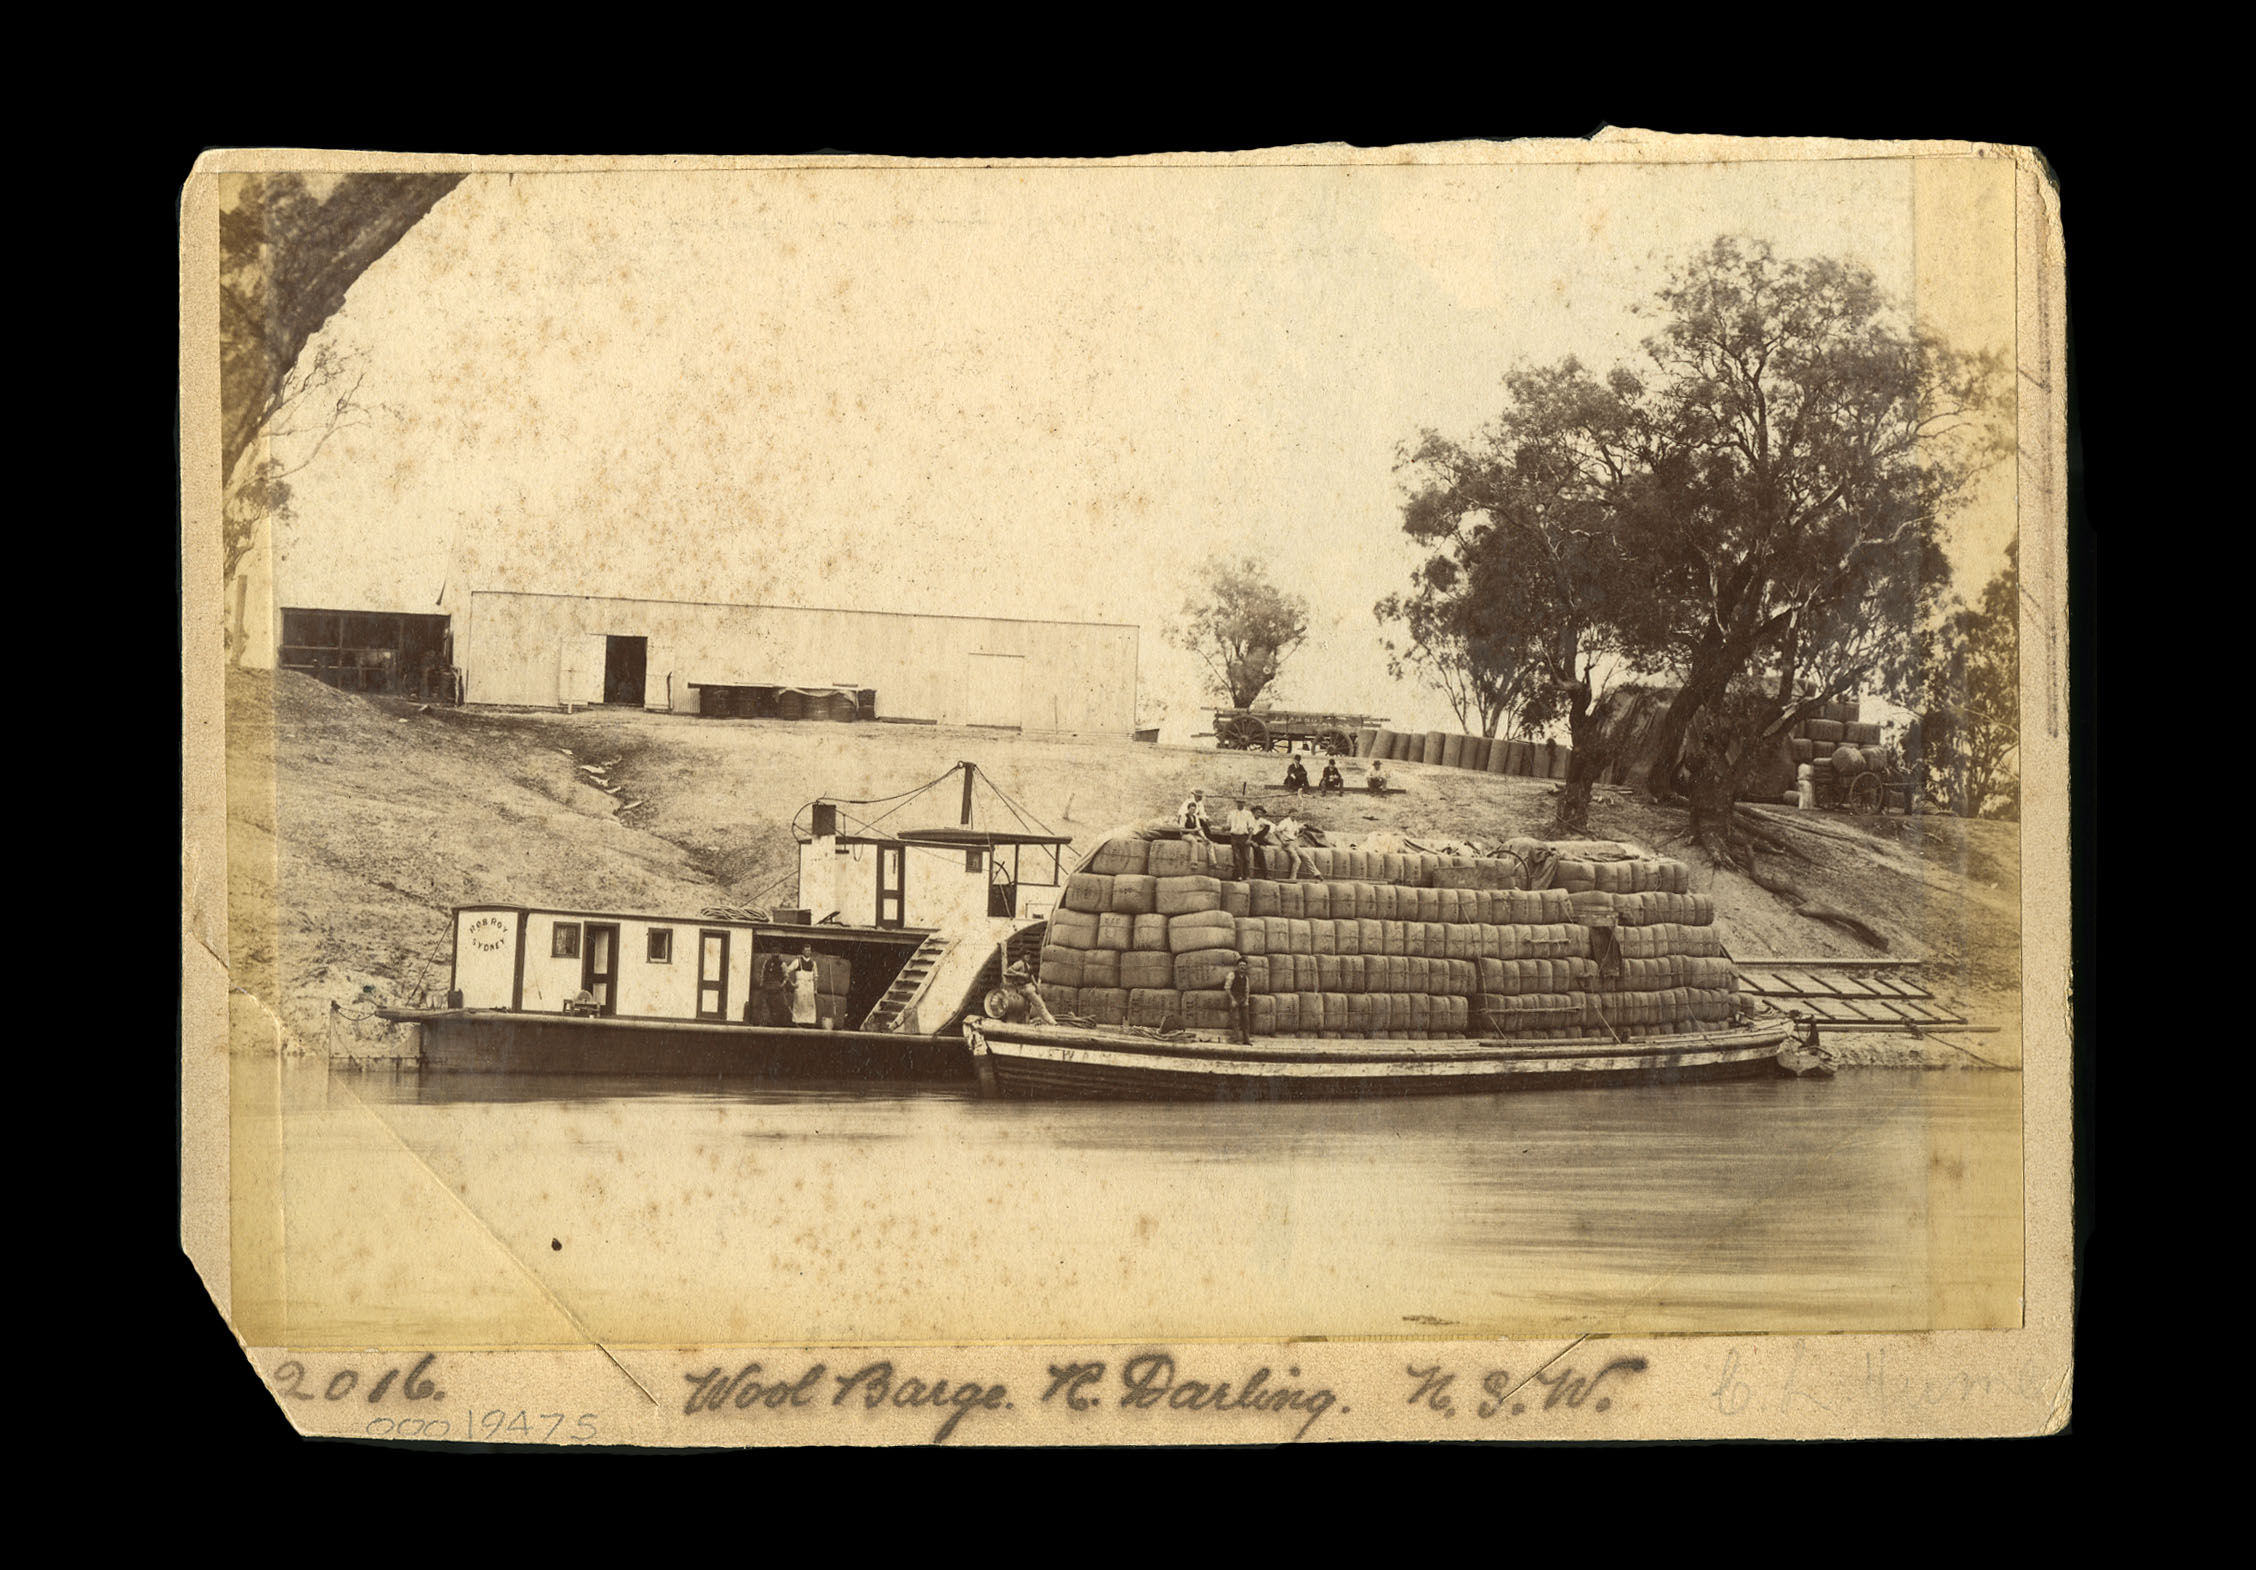 Transport boats on the Darling River, about 1890